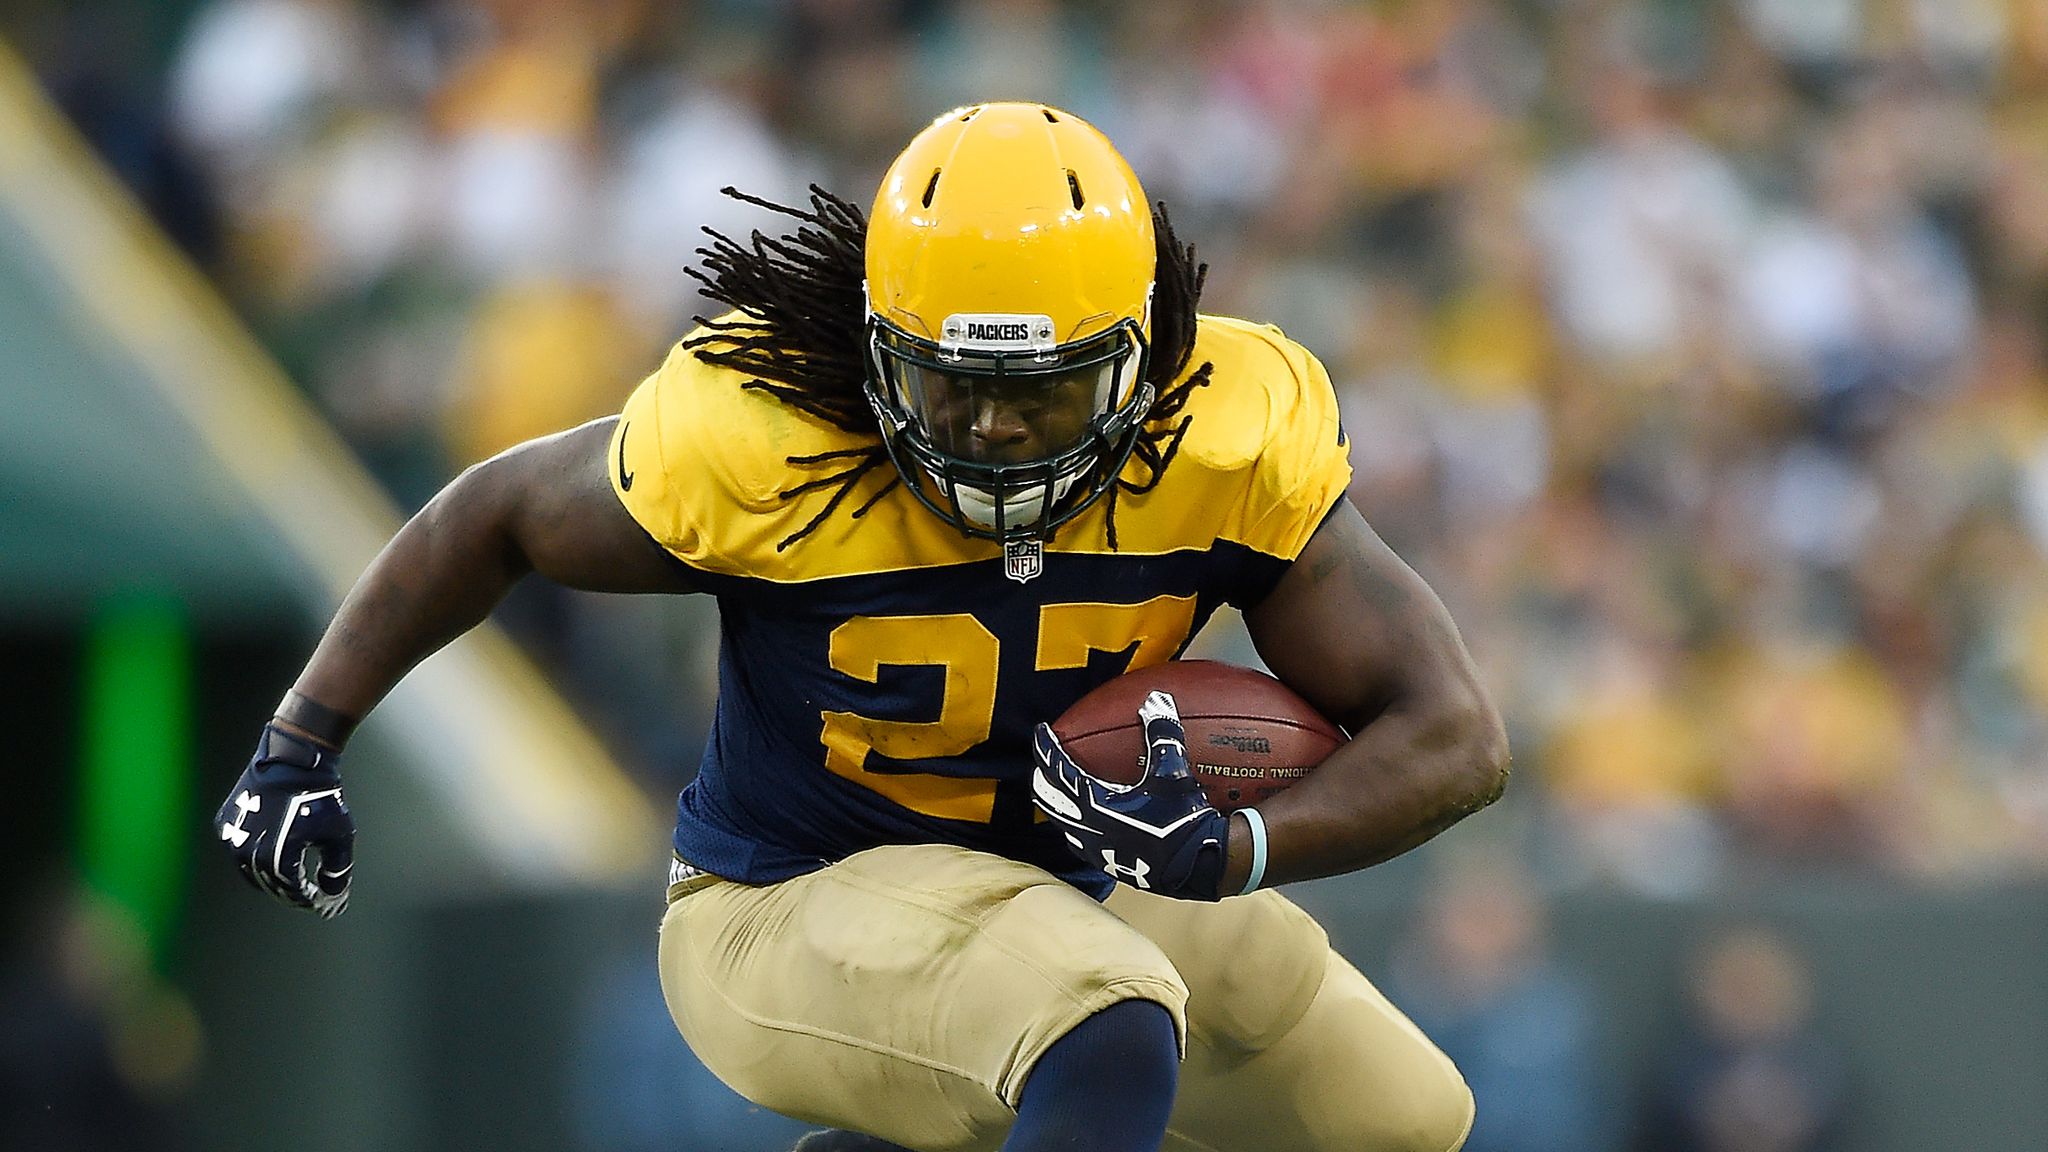 Green Bay Packers running back Eddie Lacy placed on injured